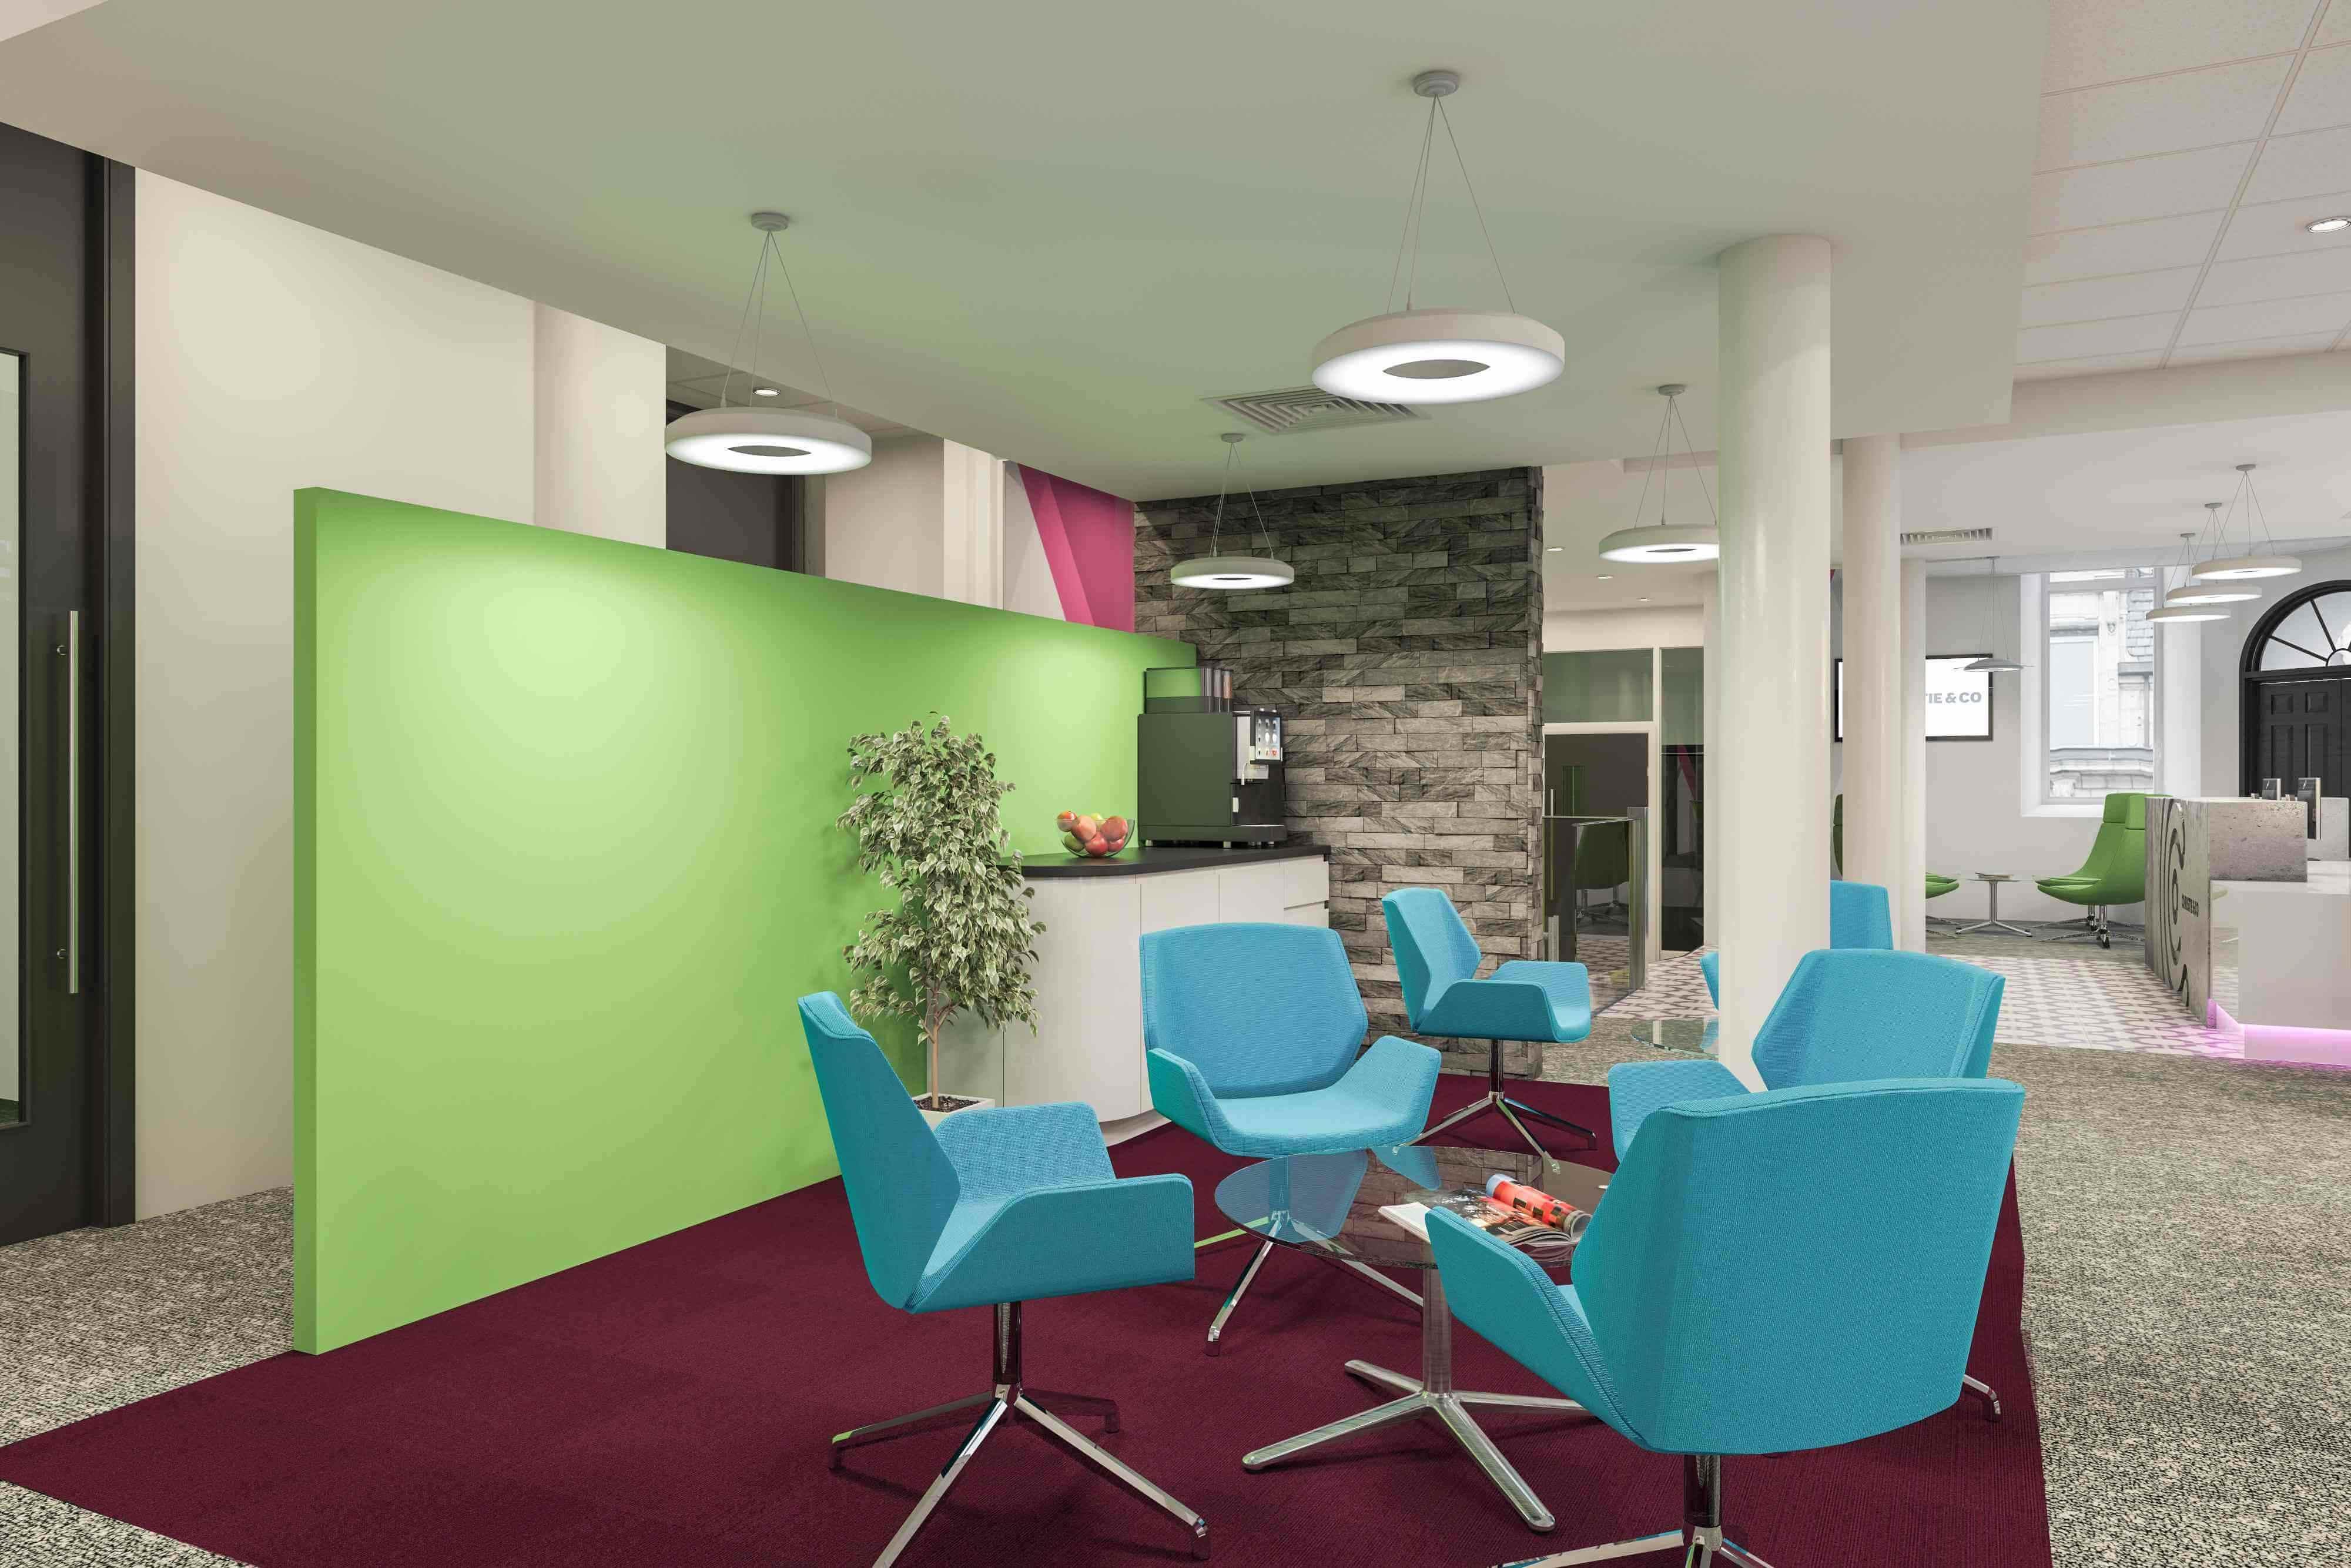 •	Integrate Different Environments